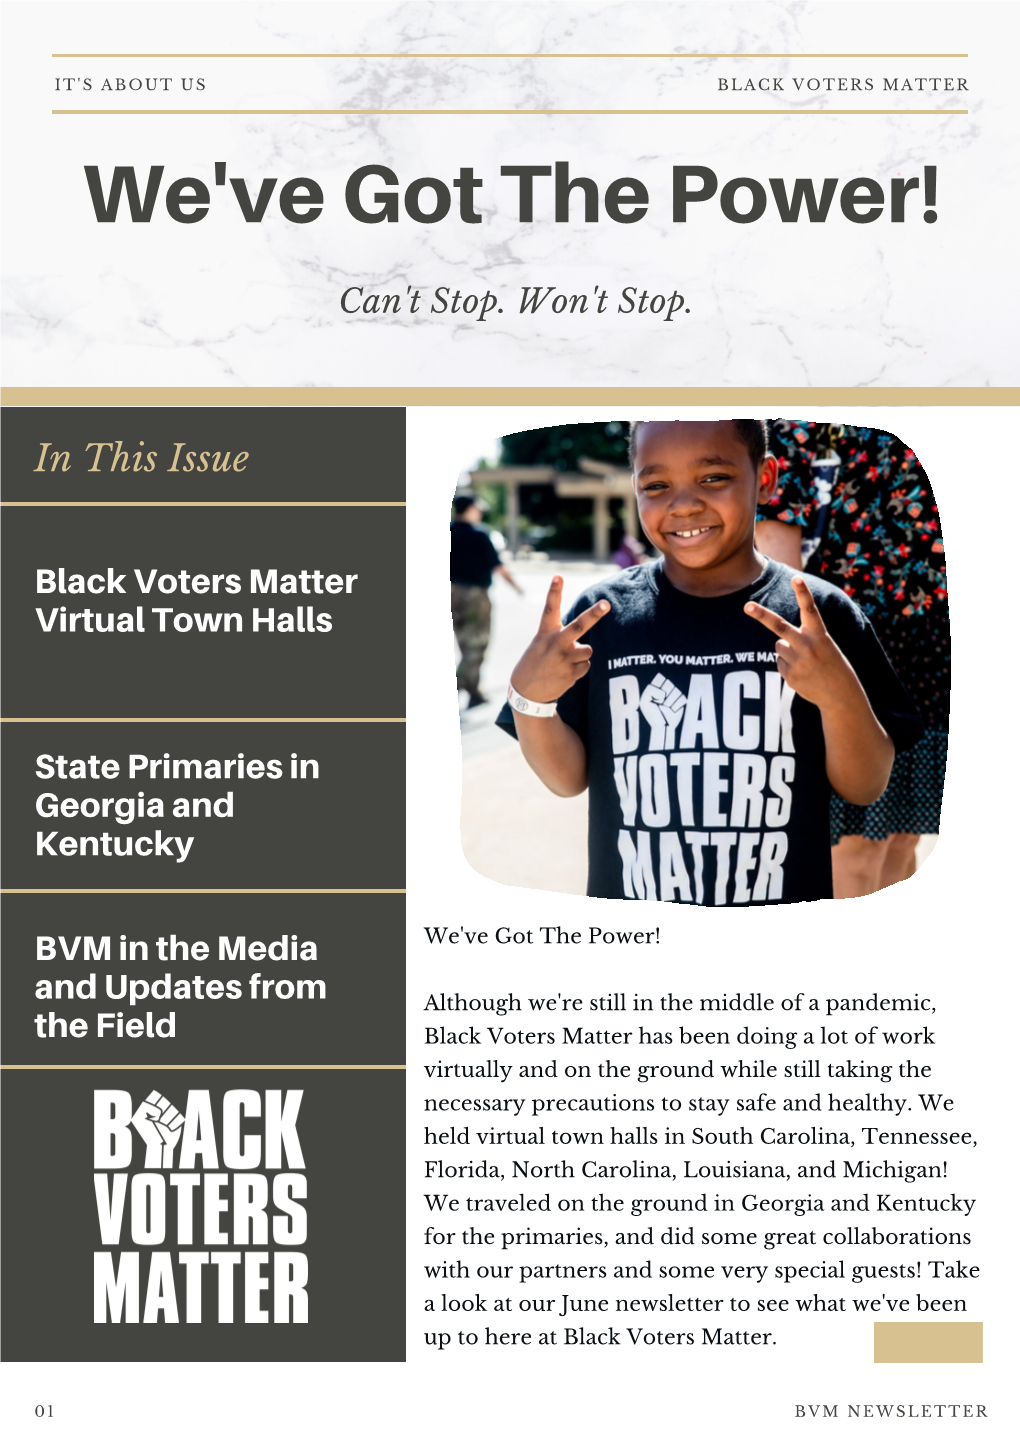 June Newsletter to See What We've Been up to Here at Black Voters Matter